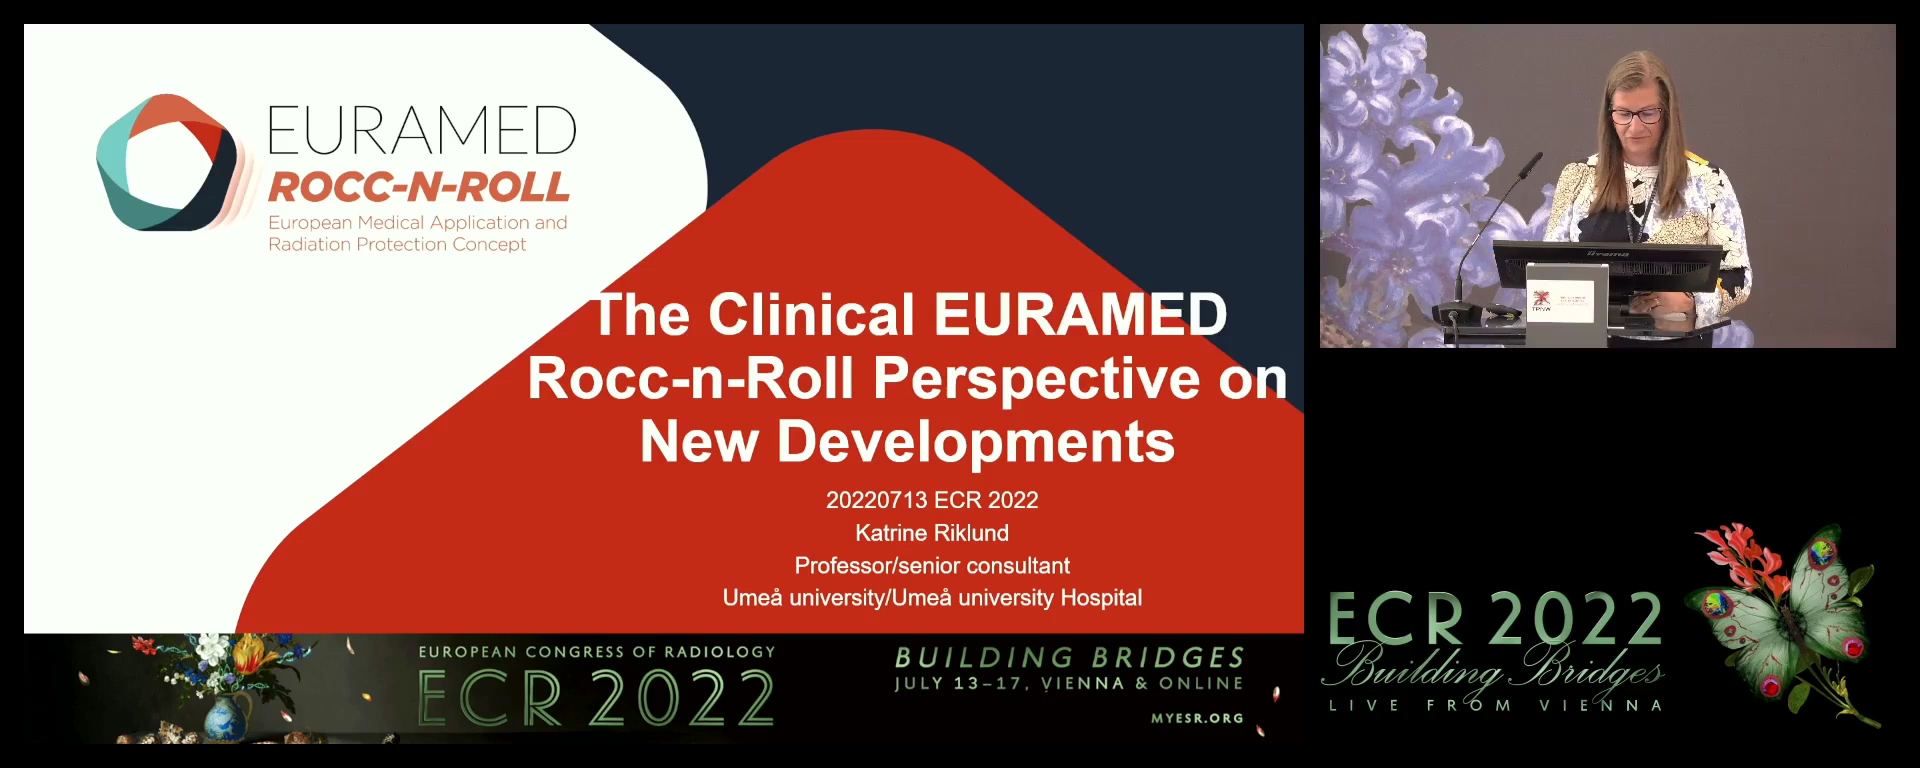 The clinical EURAMED rocc-n-roll perspective on new developments - Katrine Riklund, Umea / SE